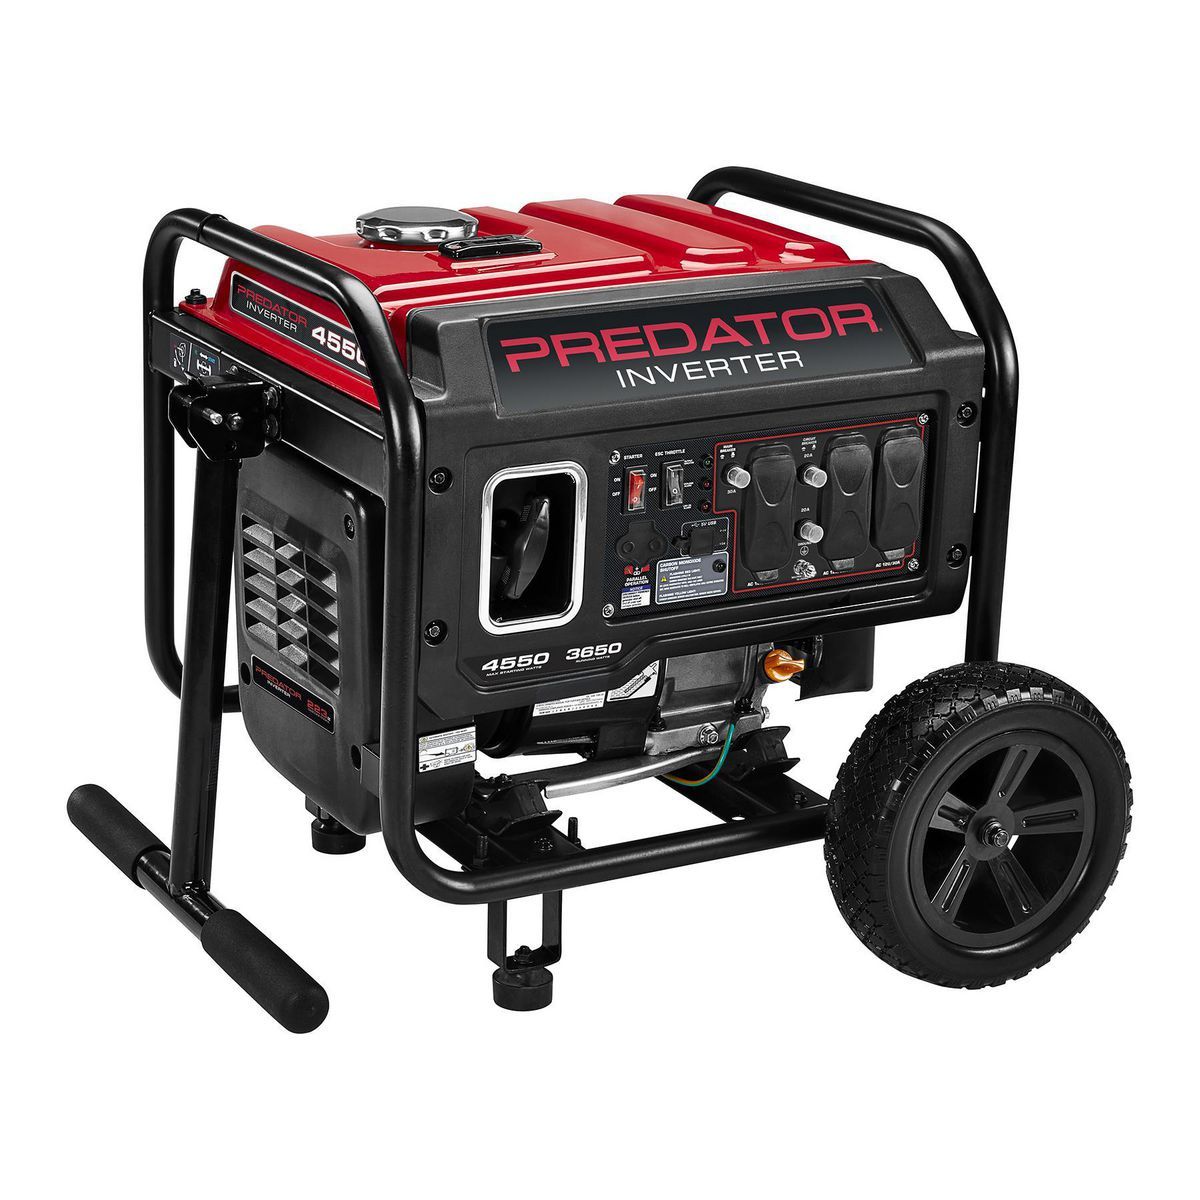 4550 Watt Inverter Generator with CO SECURE Technology, CARB